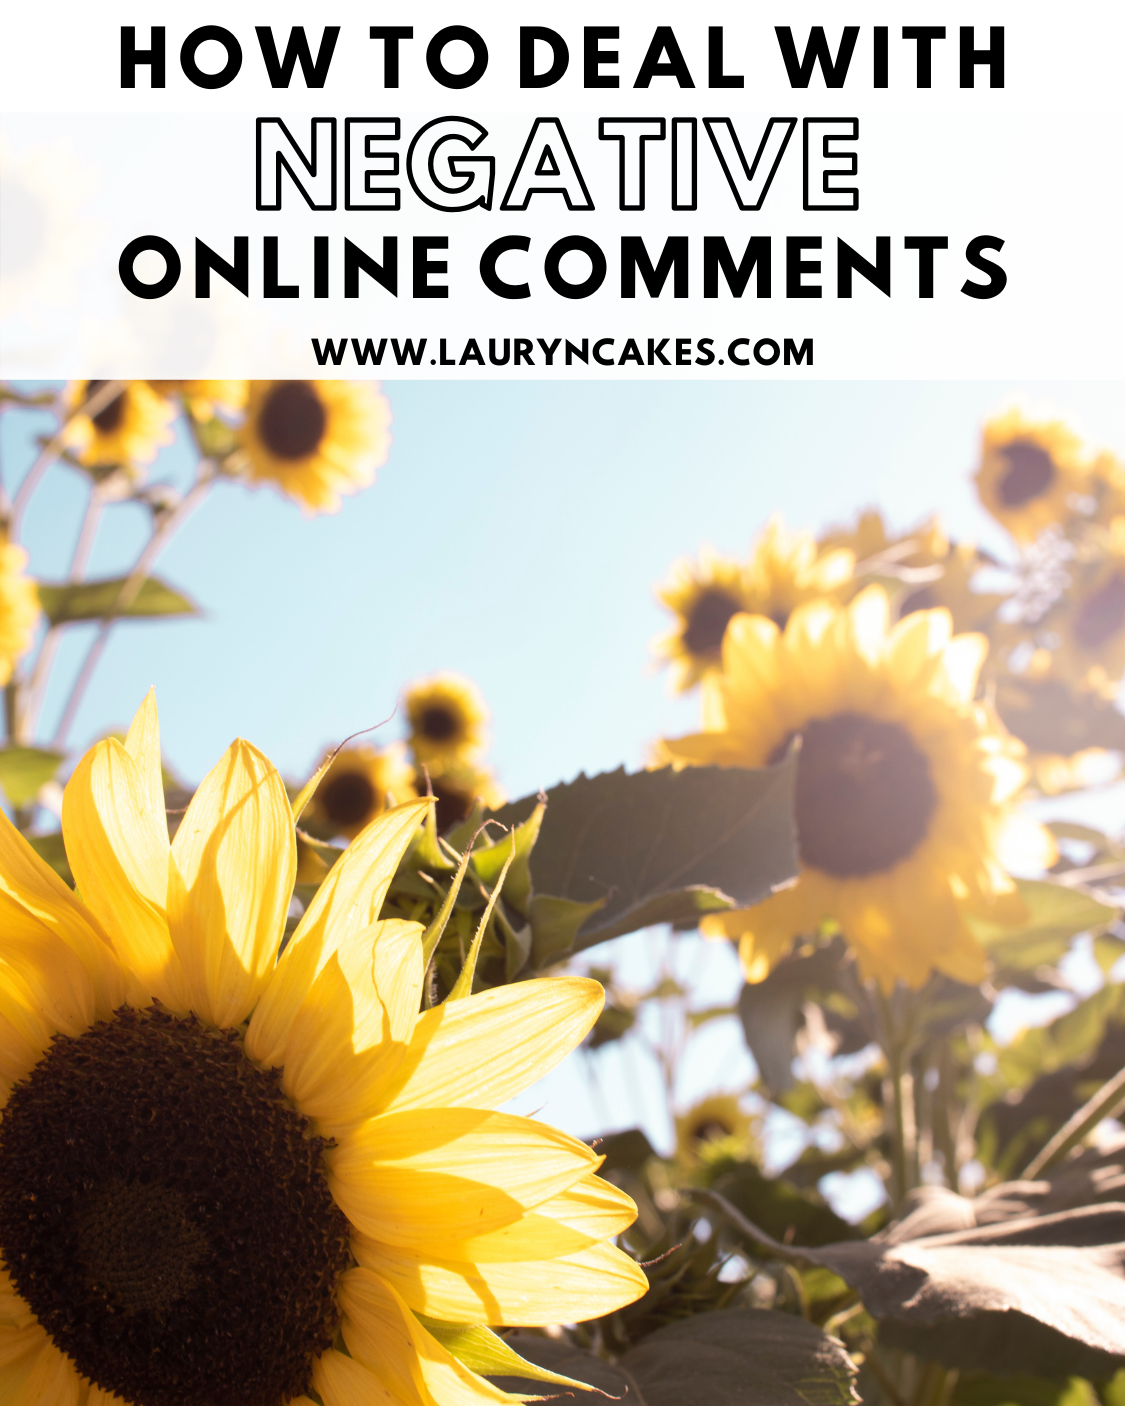 photo of sunflowers against a blue sky | image says " how to deal with negative online comments"